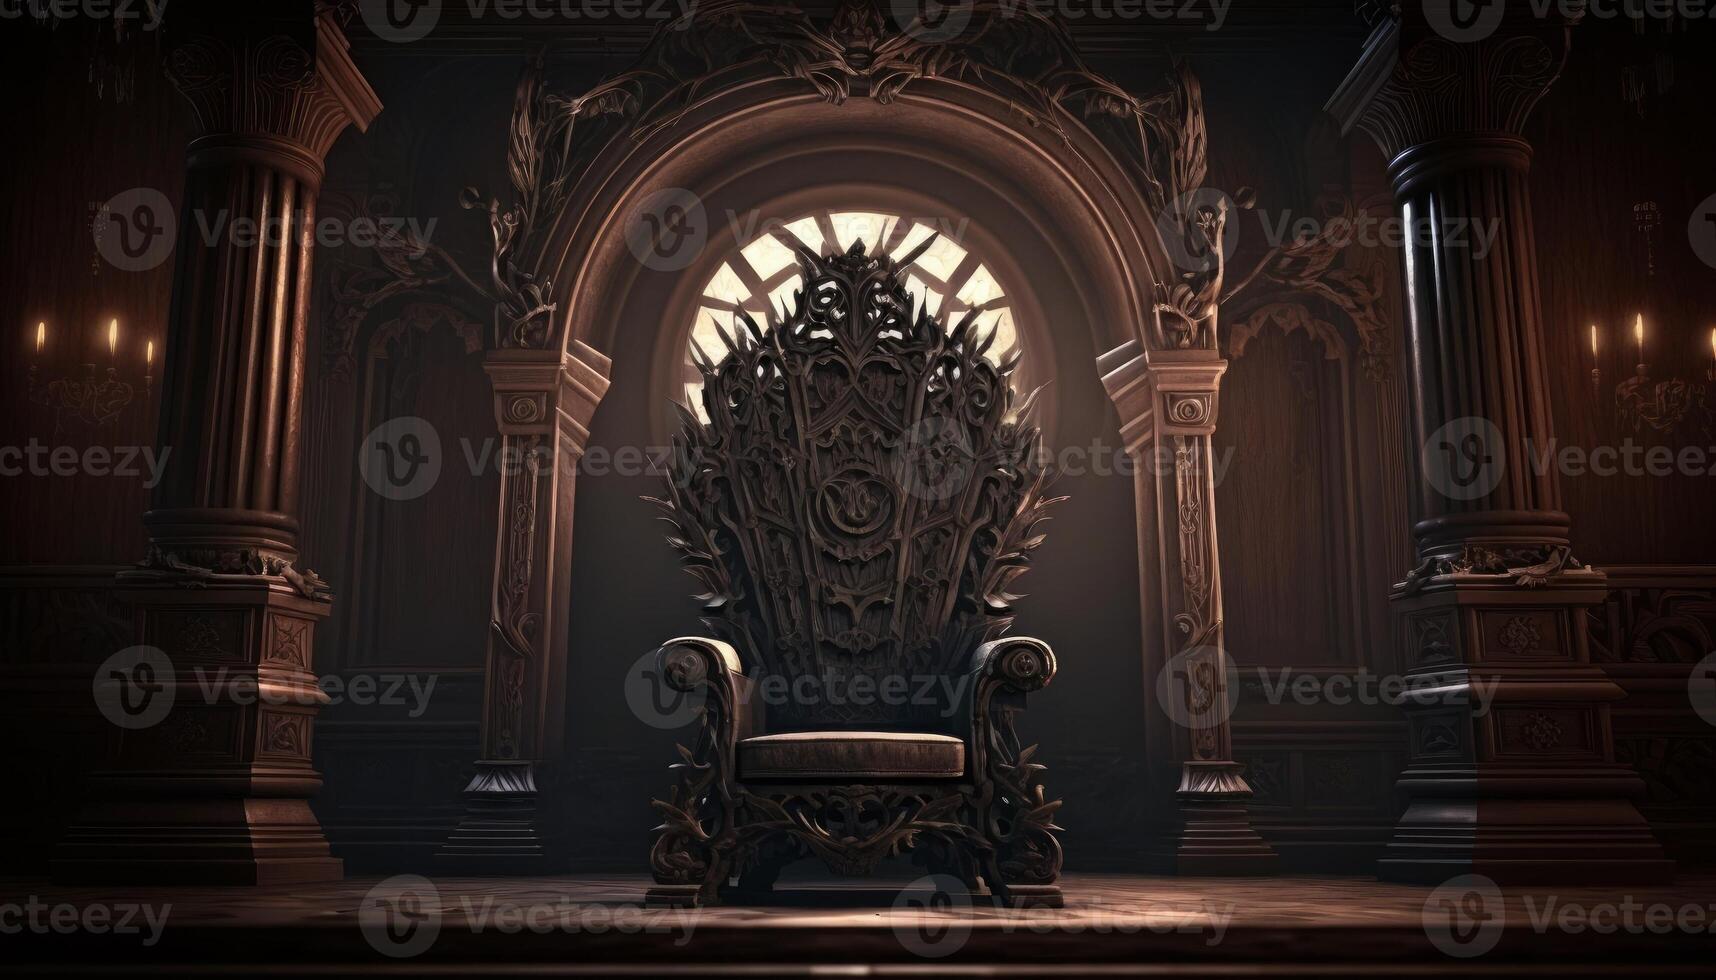 Majestic throne in the castle of darkness image vacant throne image photo